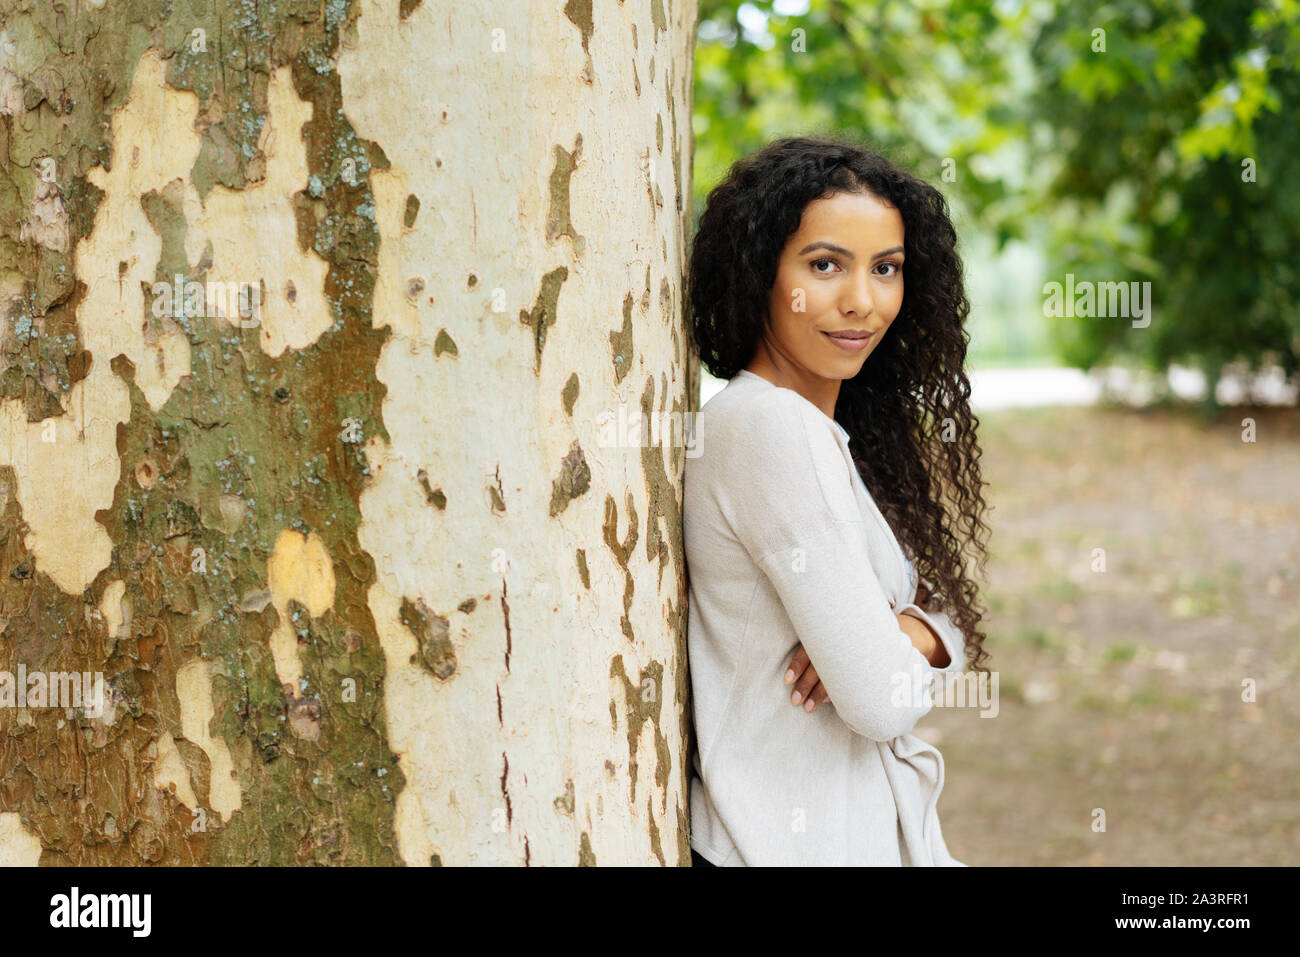 Smiling young woman outdoors in a park standing leaning against a large tree trunk with folded arms looking at the camera Stock Photo